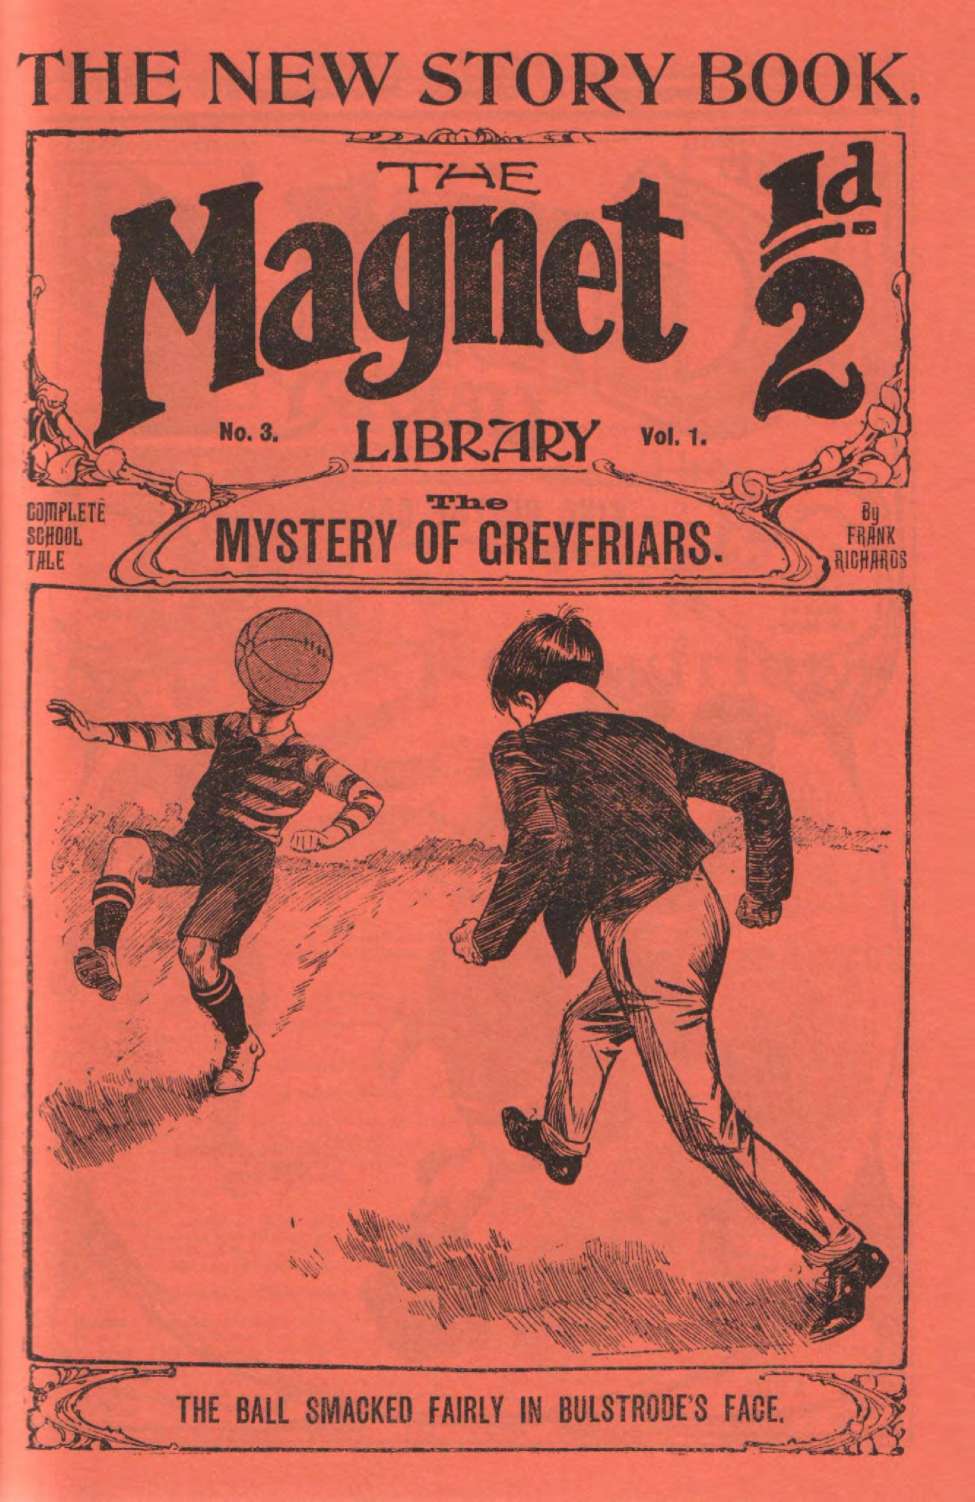 Comic Book Cover For The Magnet 3 - The Mystery of Greyfriars